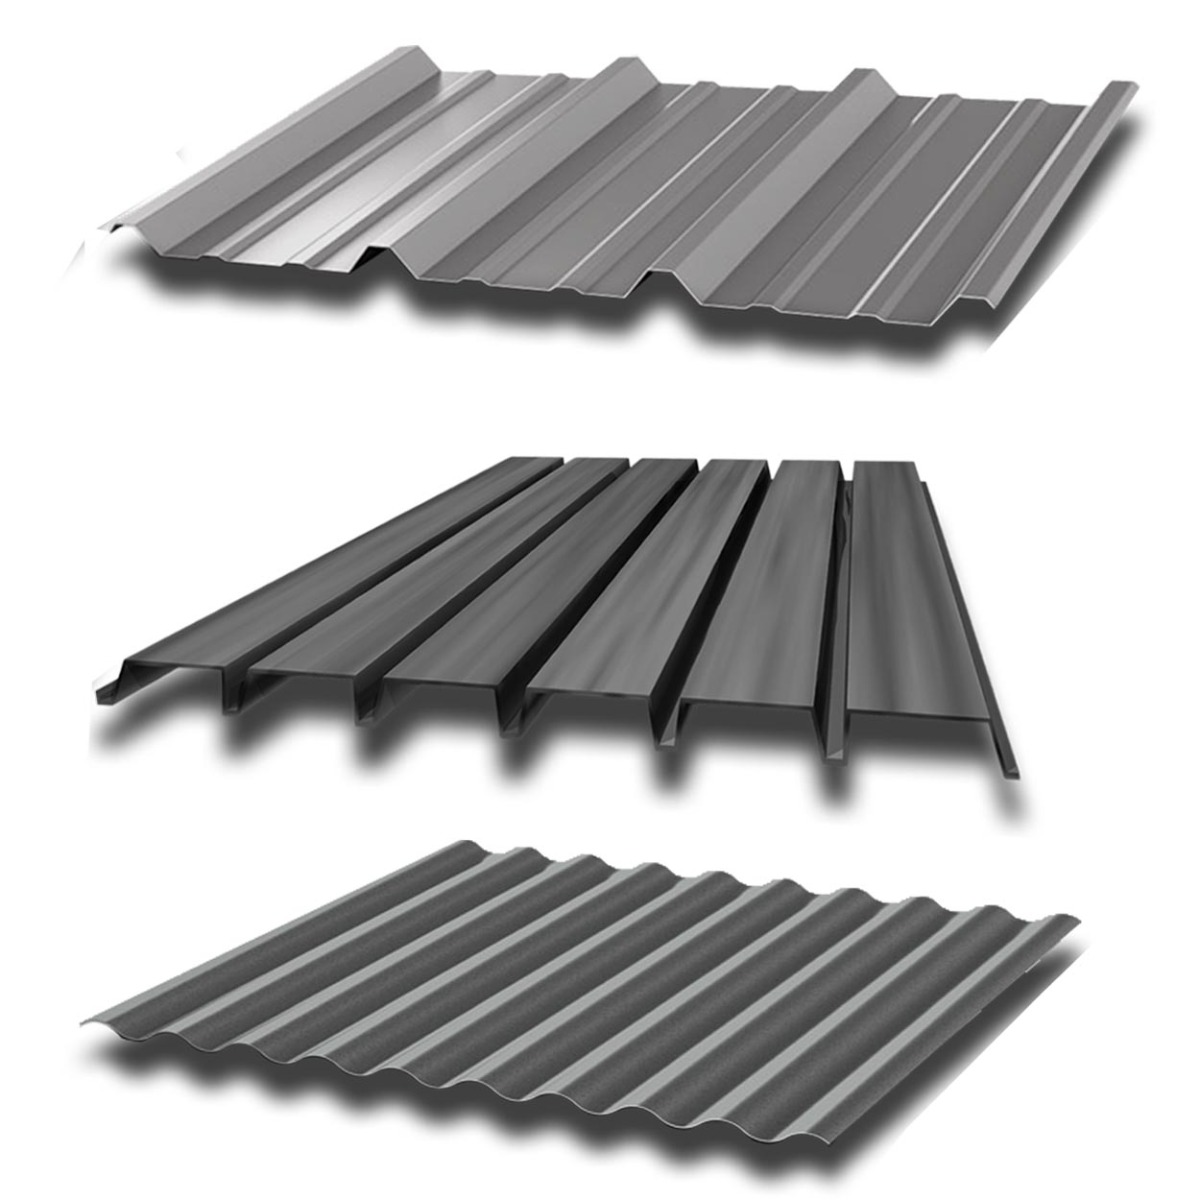 Galvanized Steel Roofing And Siding Panel